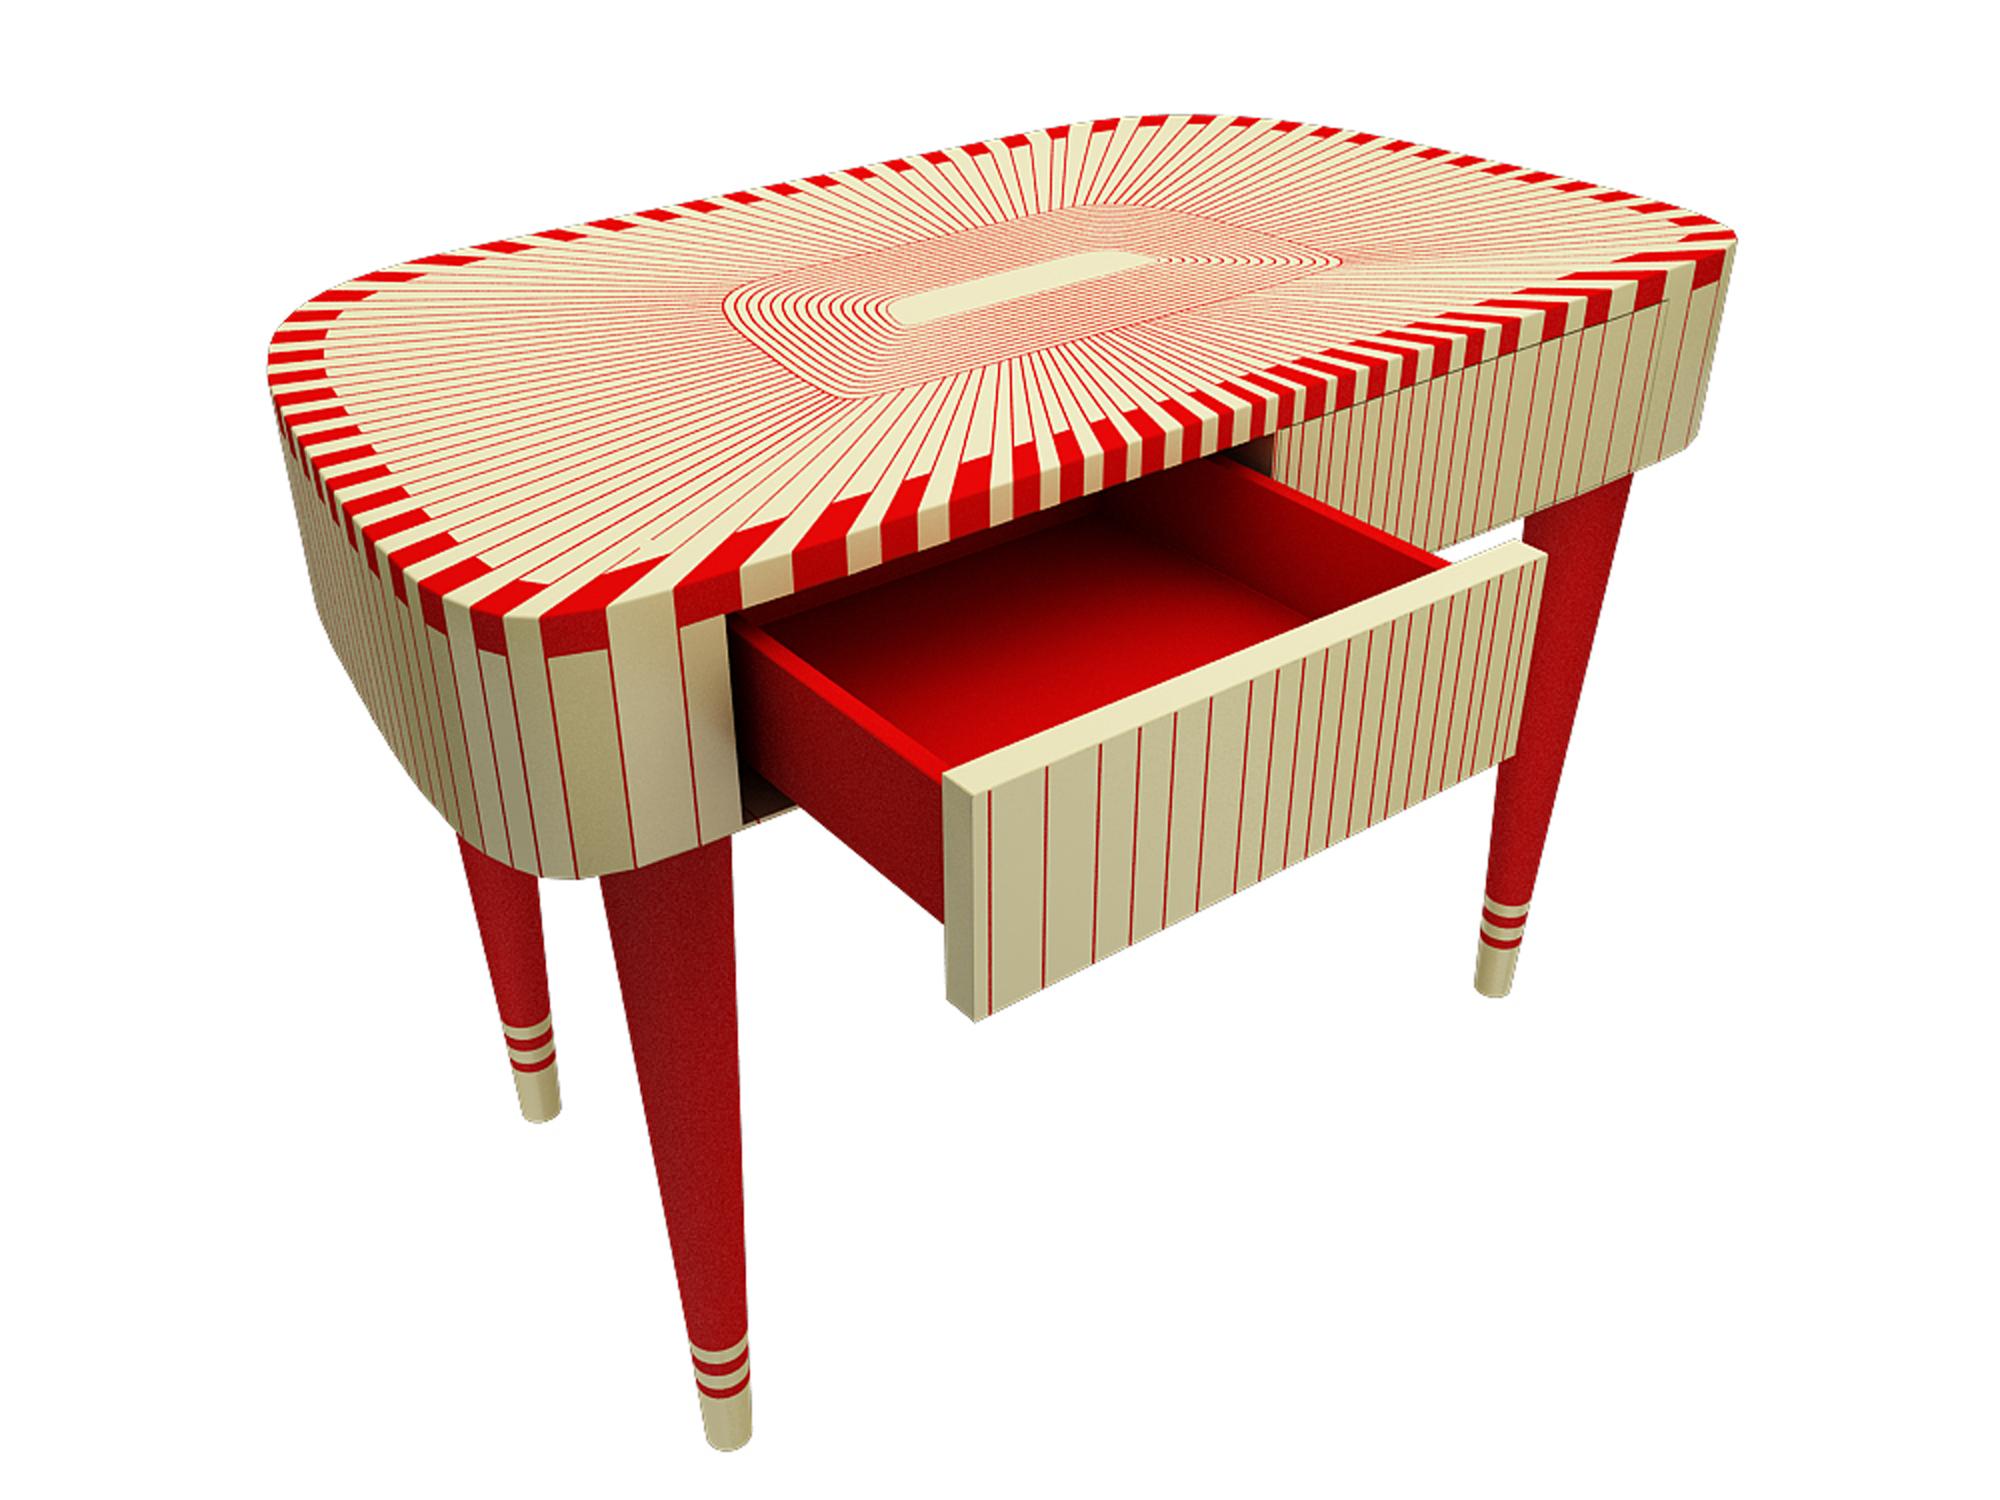 Modern Paris Bureau Red and White Study Desk Writing Table by Matteo Cibic For Sale